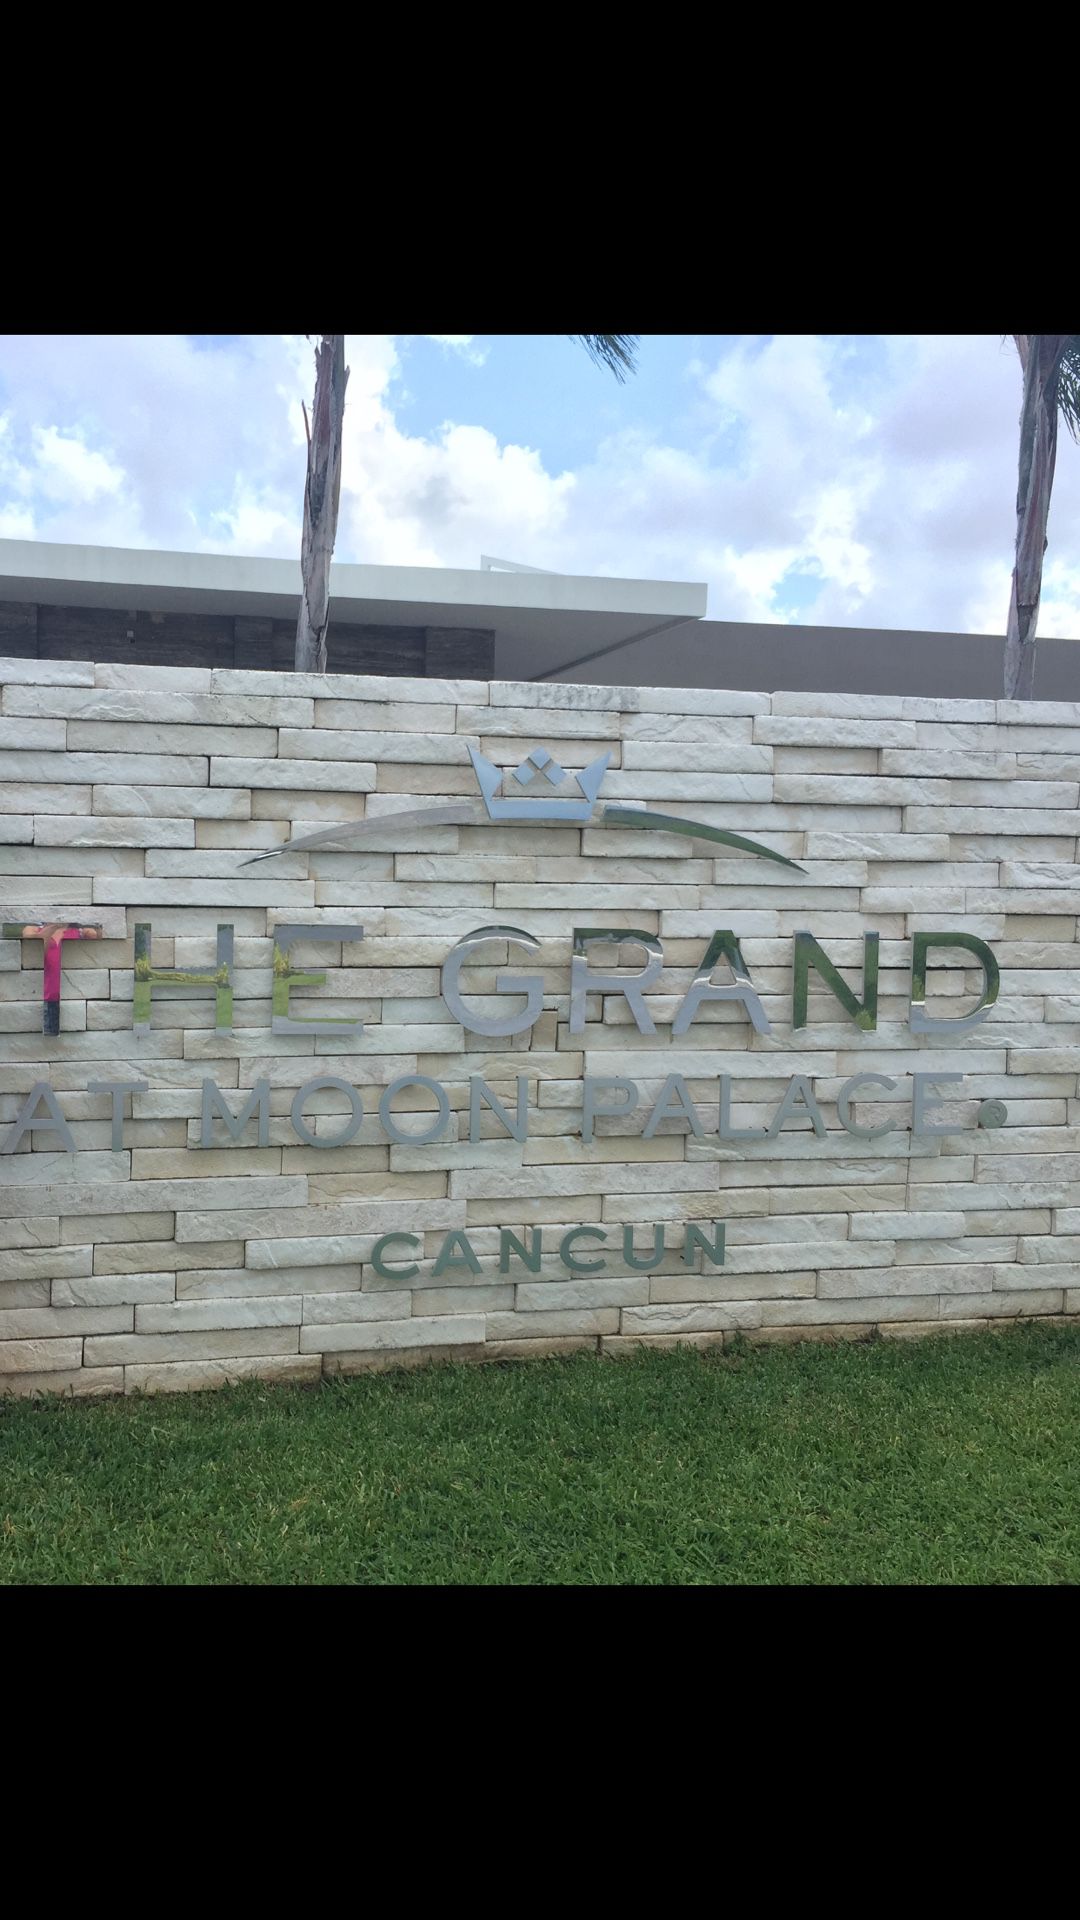 Cancun all inclusive the Grand at Moon Palace